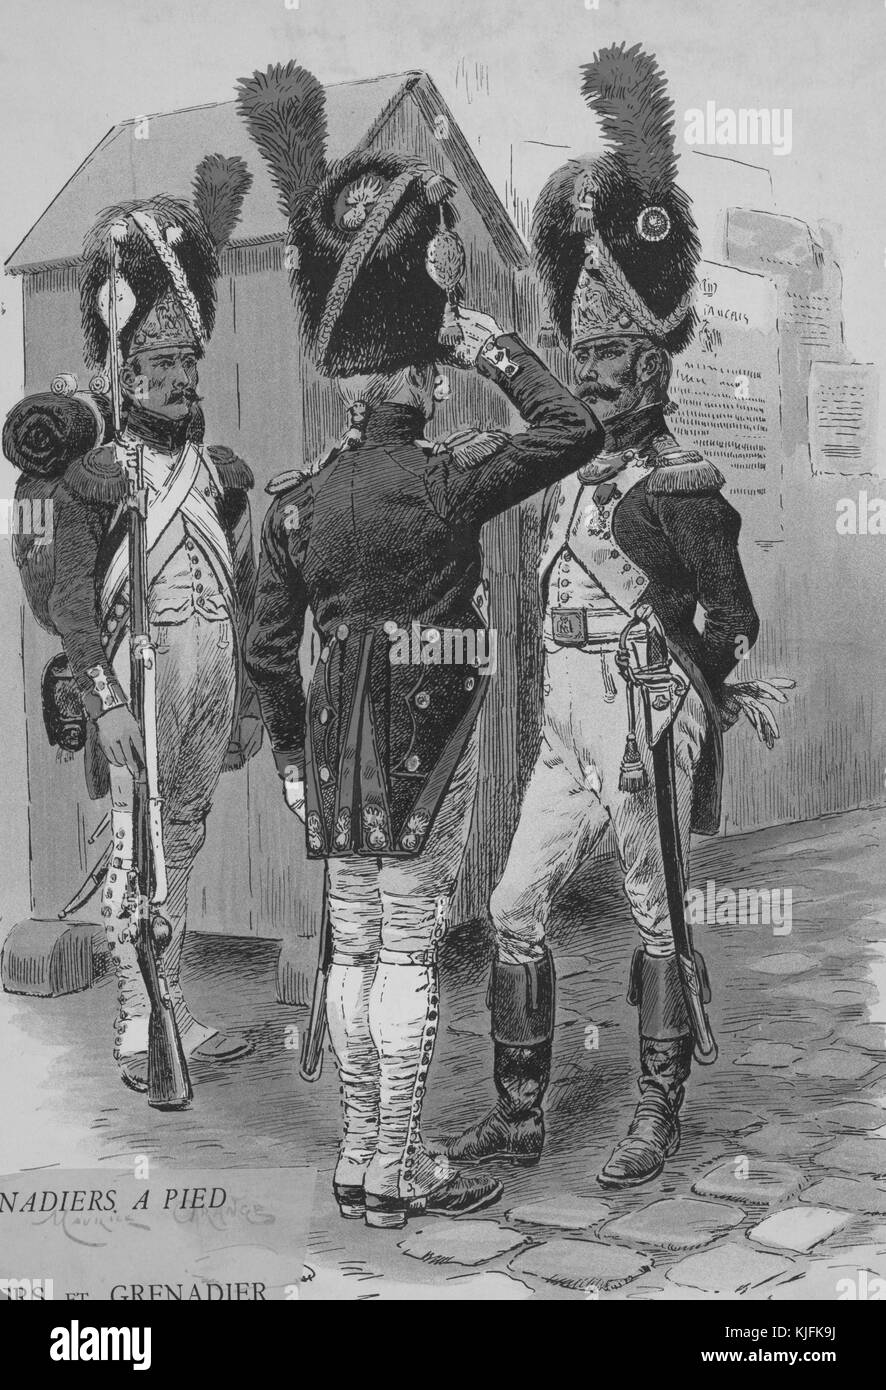 A colored illustration depicting three French Grenadiers, the Grenadier on the right is the highest ranking soldier in the drawing as he is receiving a salute from the solider in the middle, but not returning it, the soldier on the left is the lowest rank as he stands at attention and carries equipment for camping, he also has a less ornate uniform, 1744. From the New York Public Library. Stock Photo